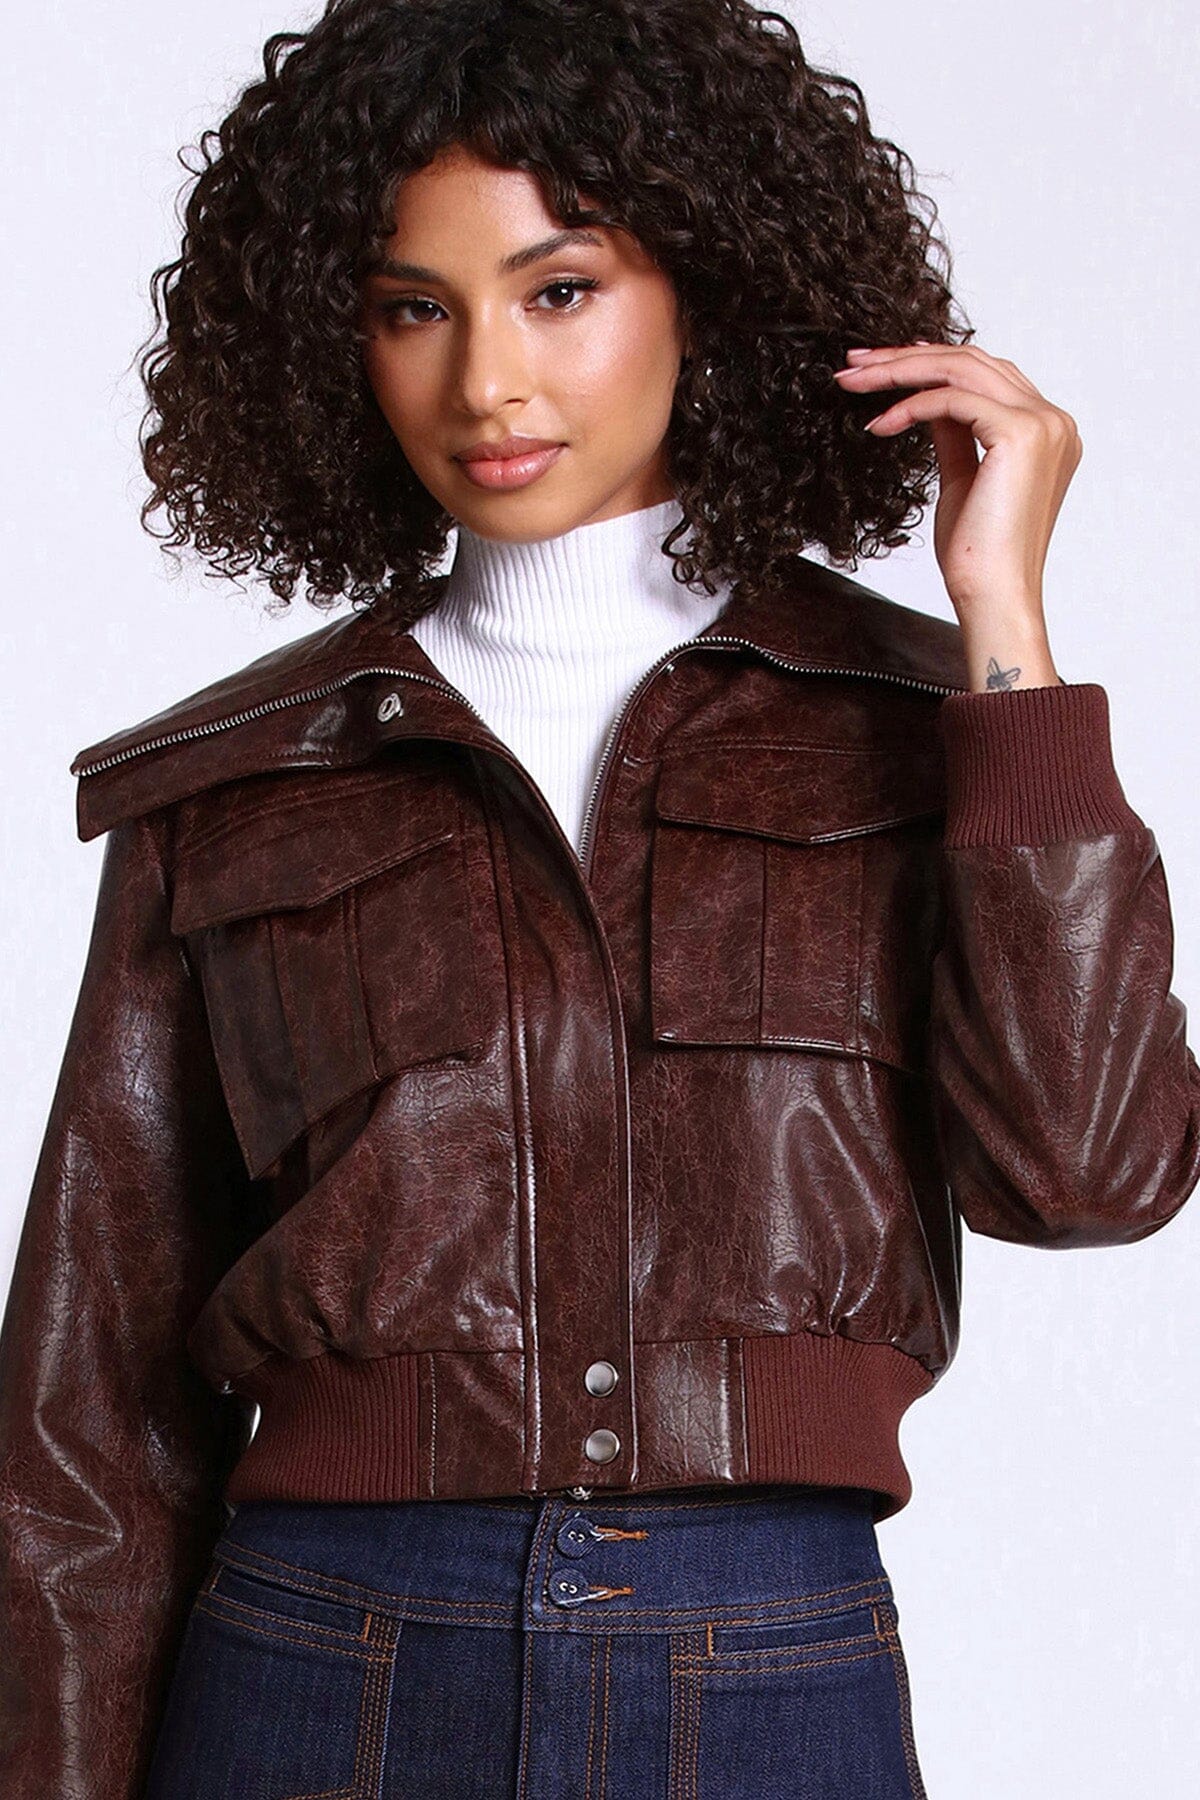 Tobacco brown faux ever leather cropped aviator bomber jacket coat - figure flattering office to date night jackets coats for women